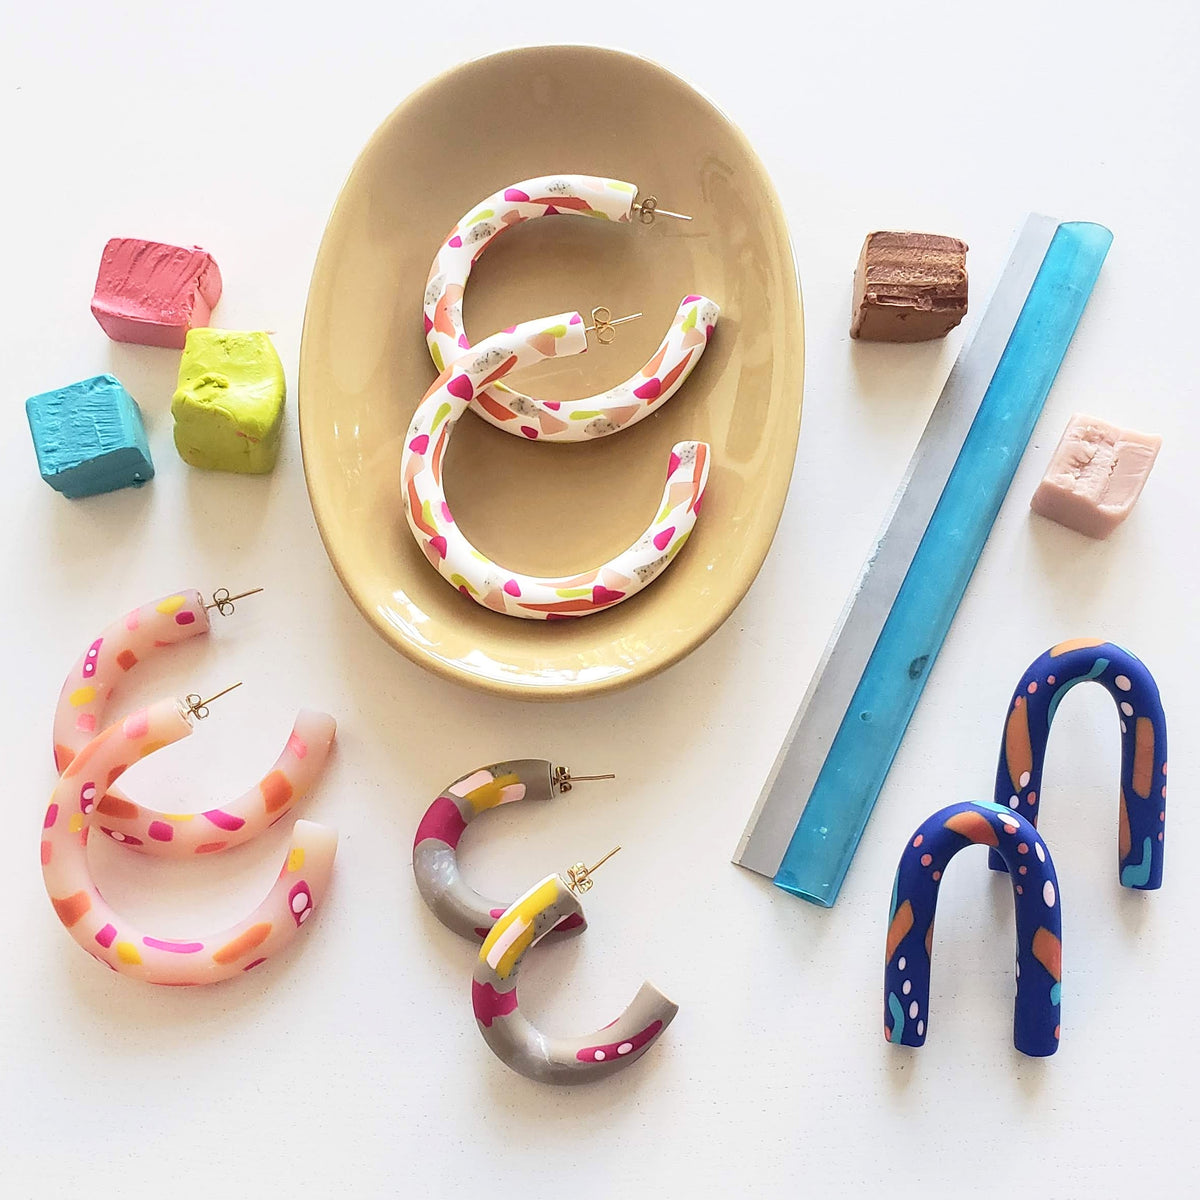 Virtual Polymer Clay Jewelry (Kit Included) - Team Building Activity